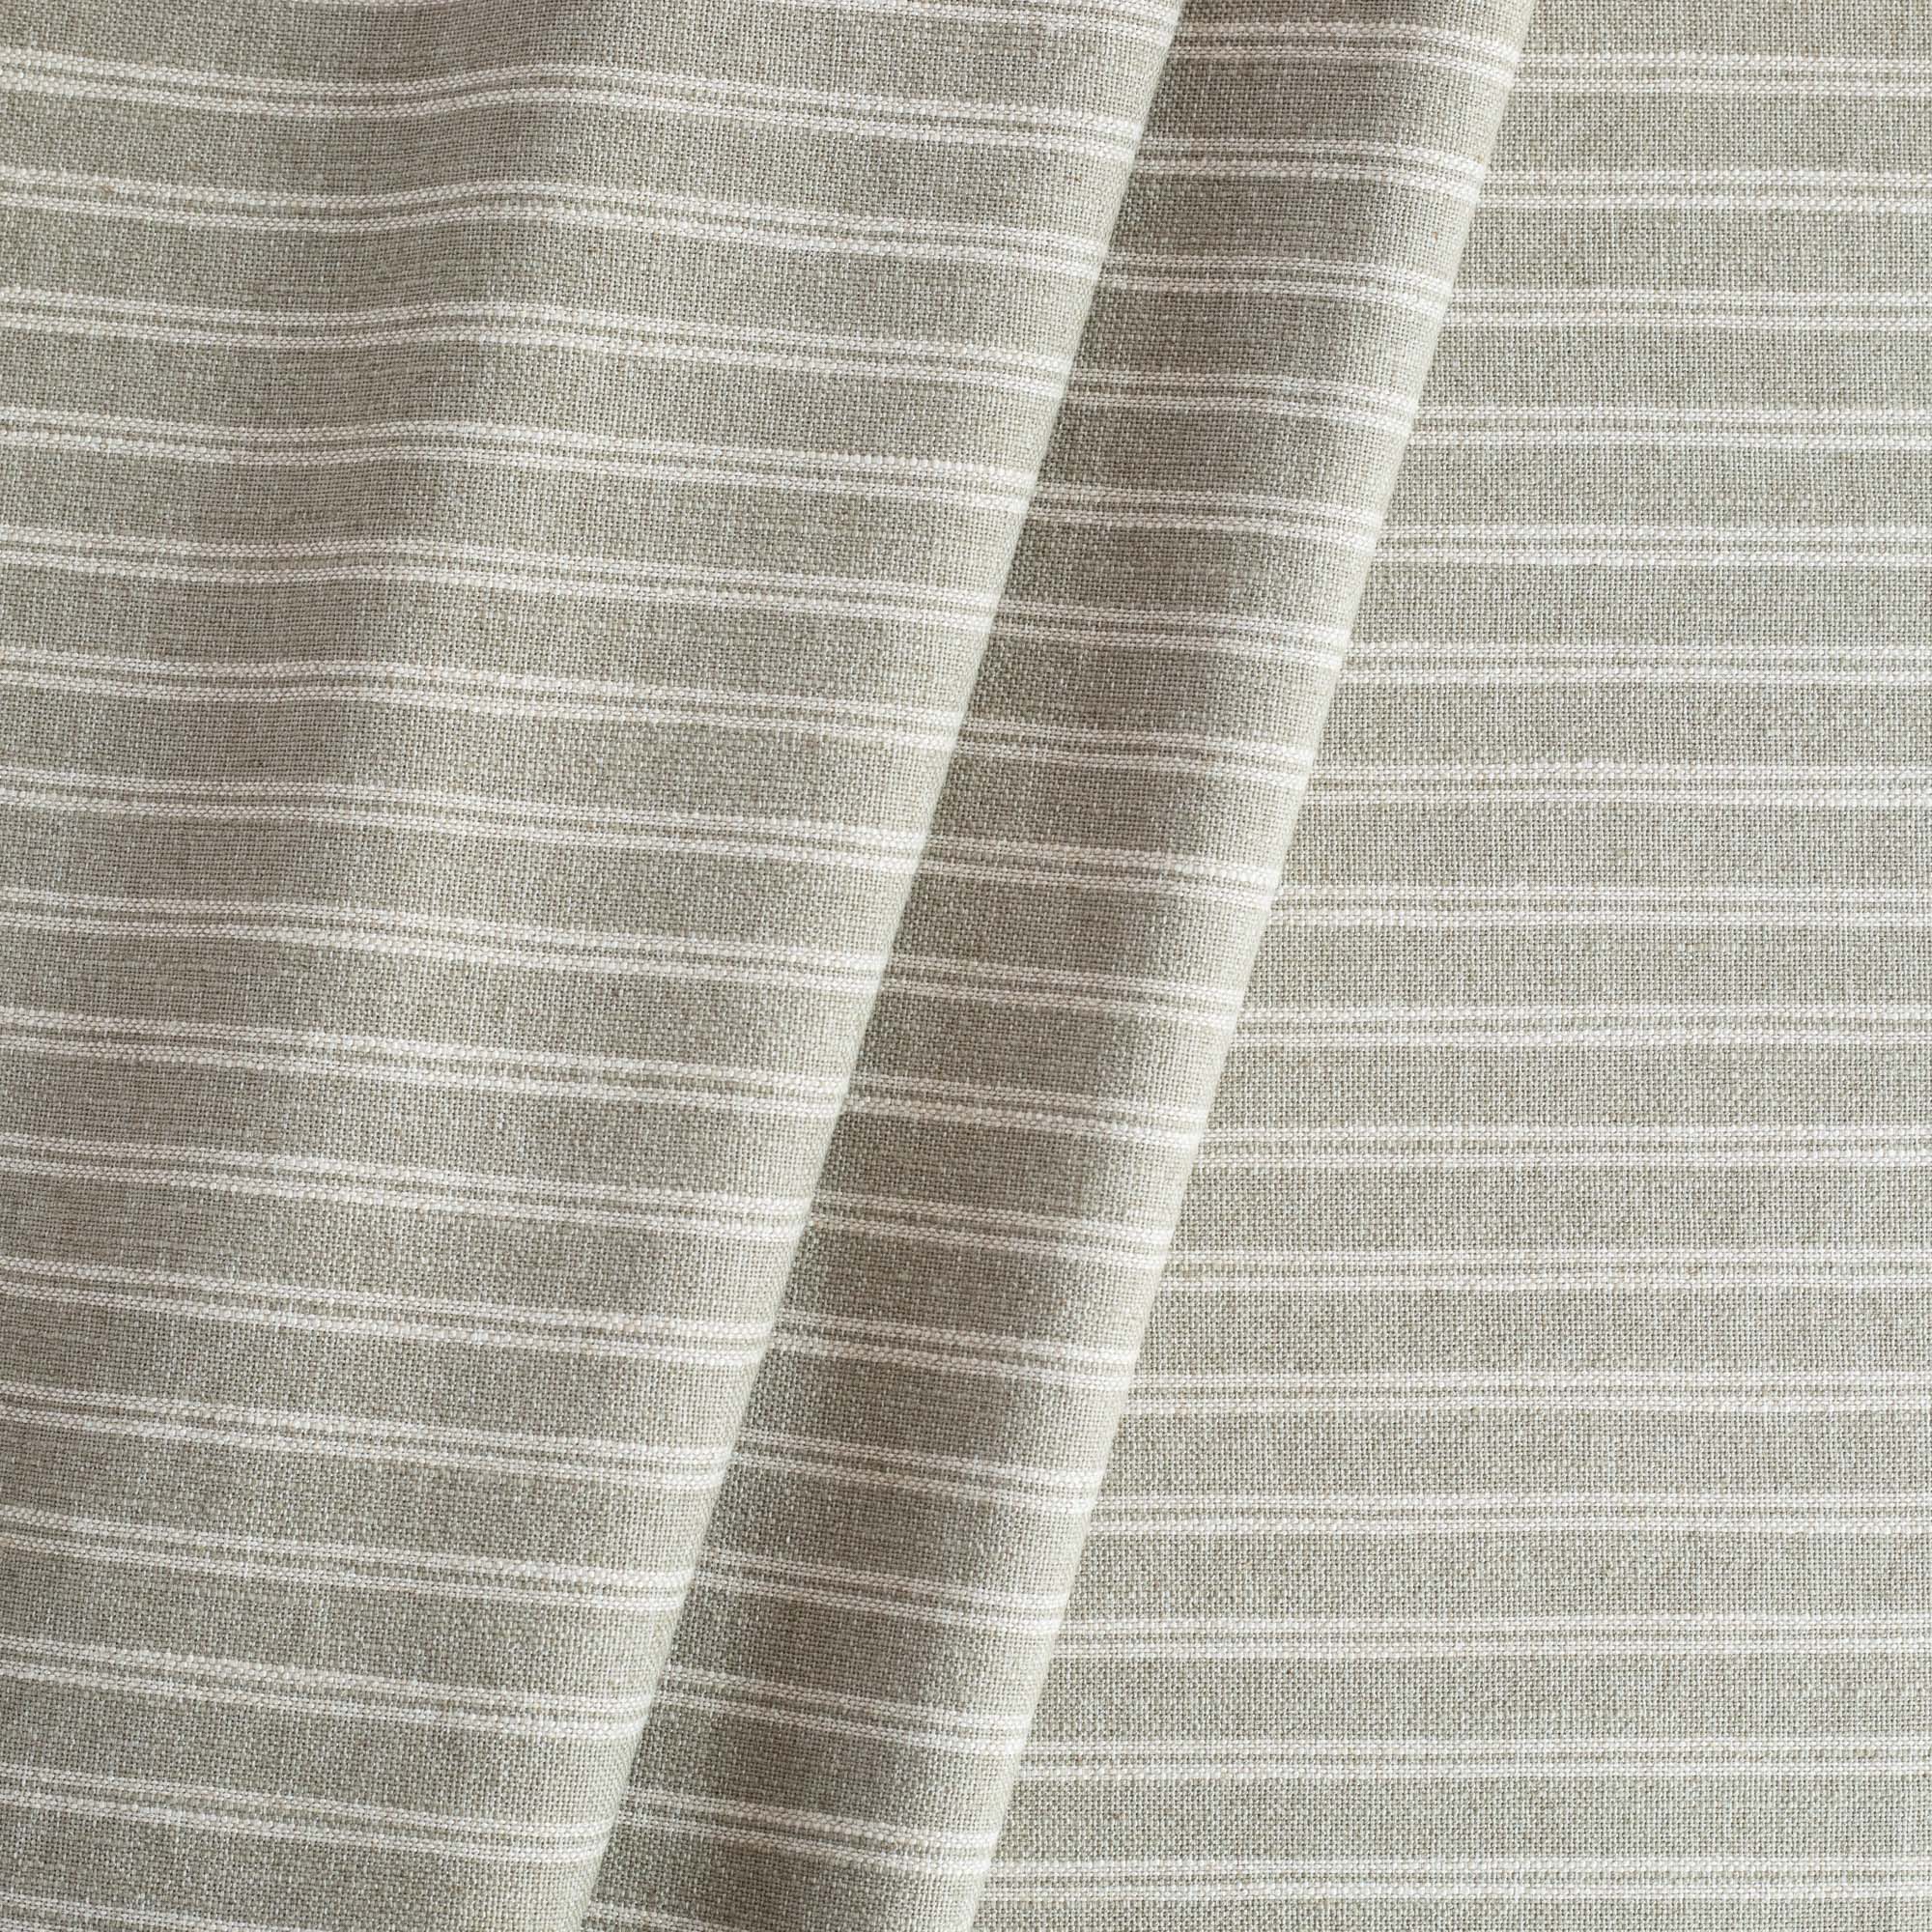 Conway Stripe Sage, a sage green and beige striped upholstery drapery fabric from Tonic Living